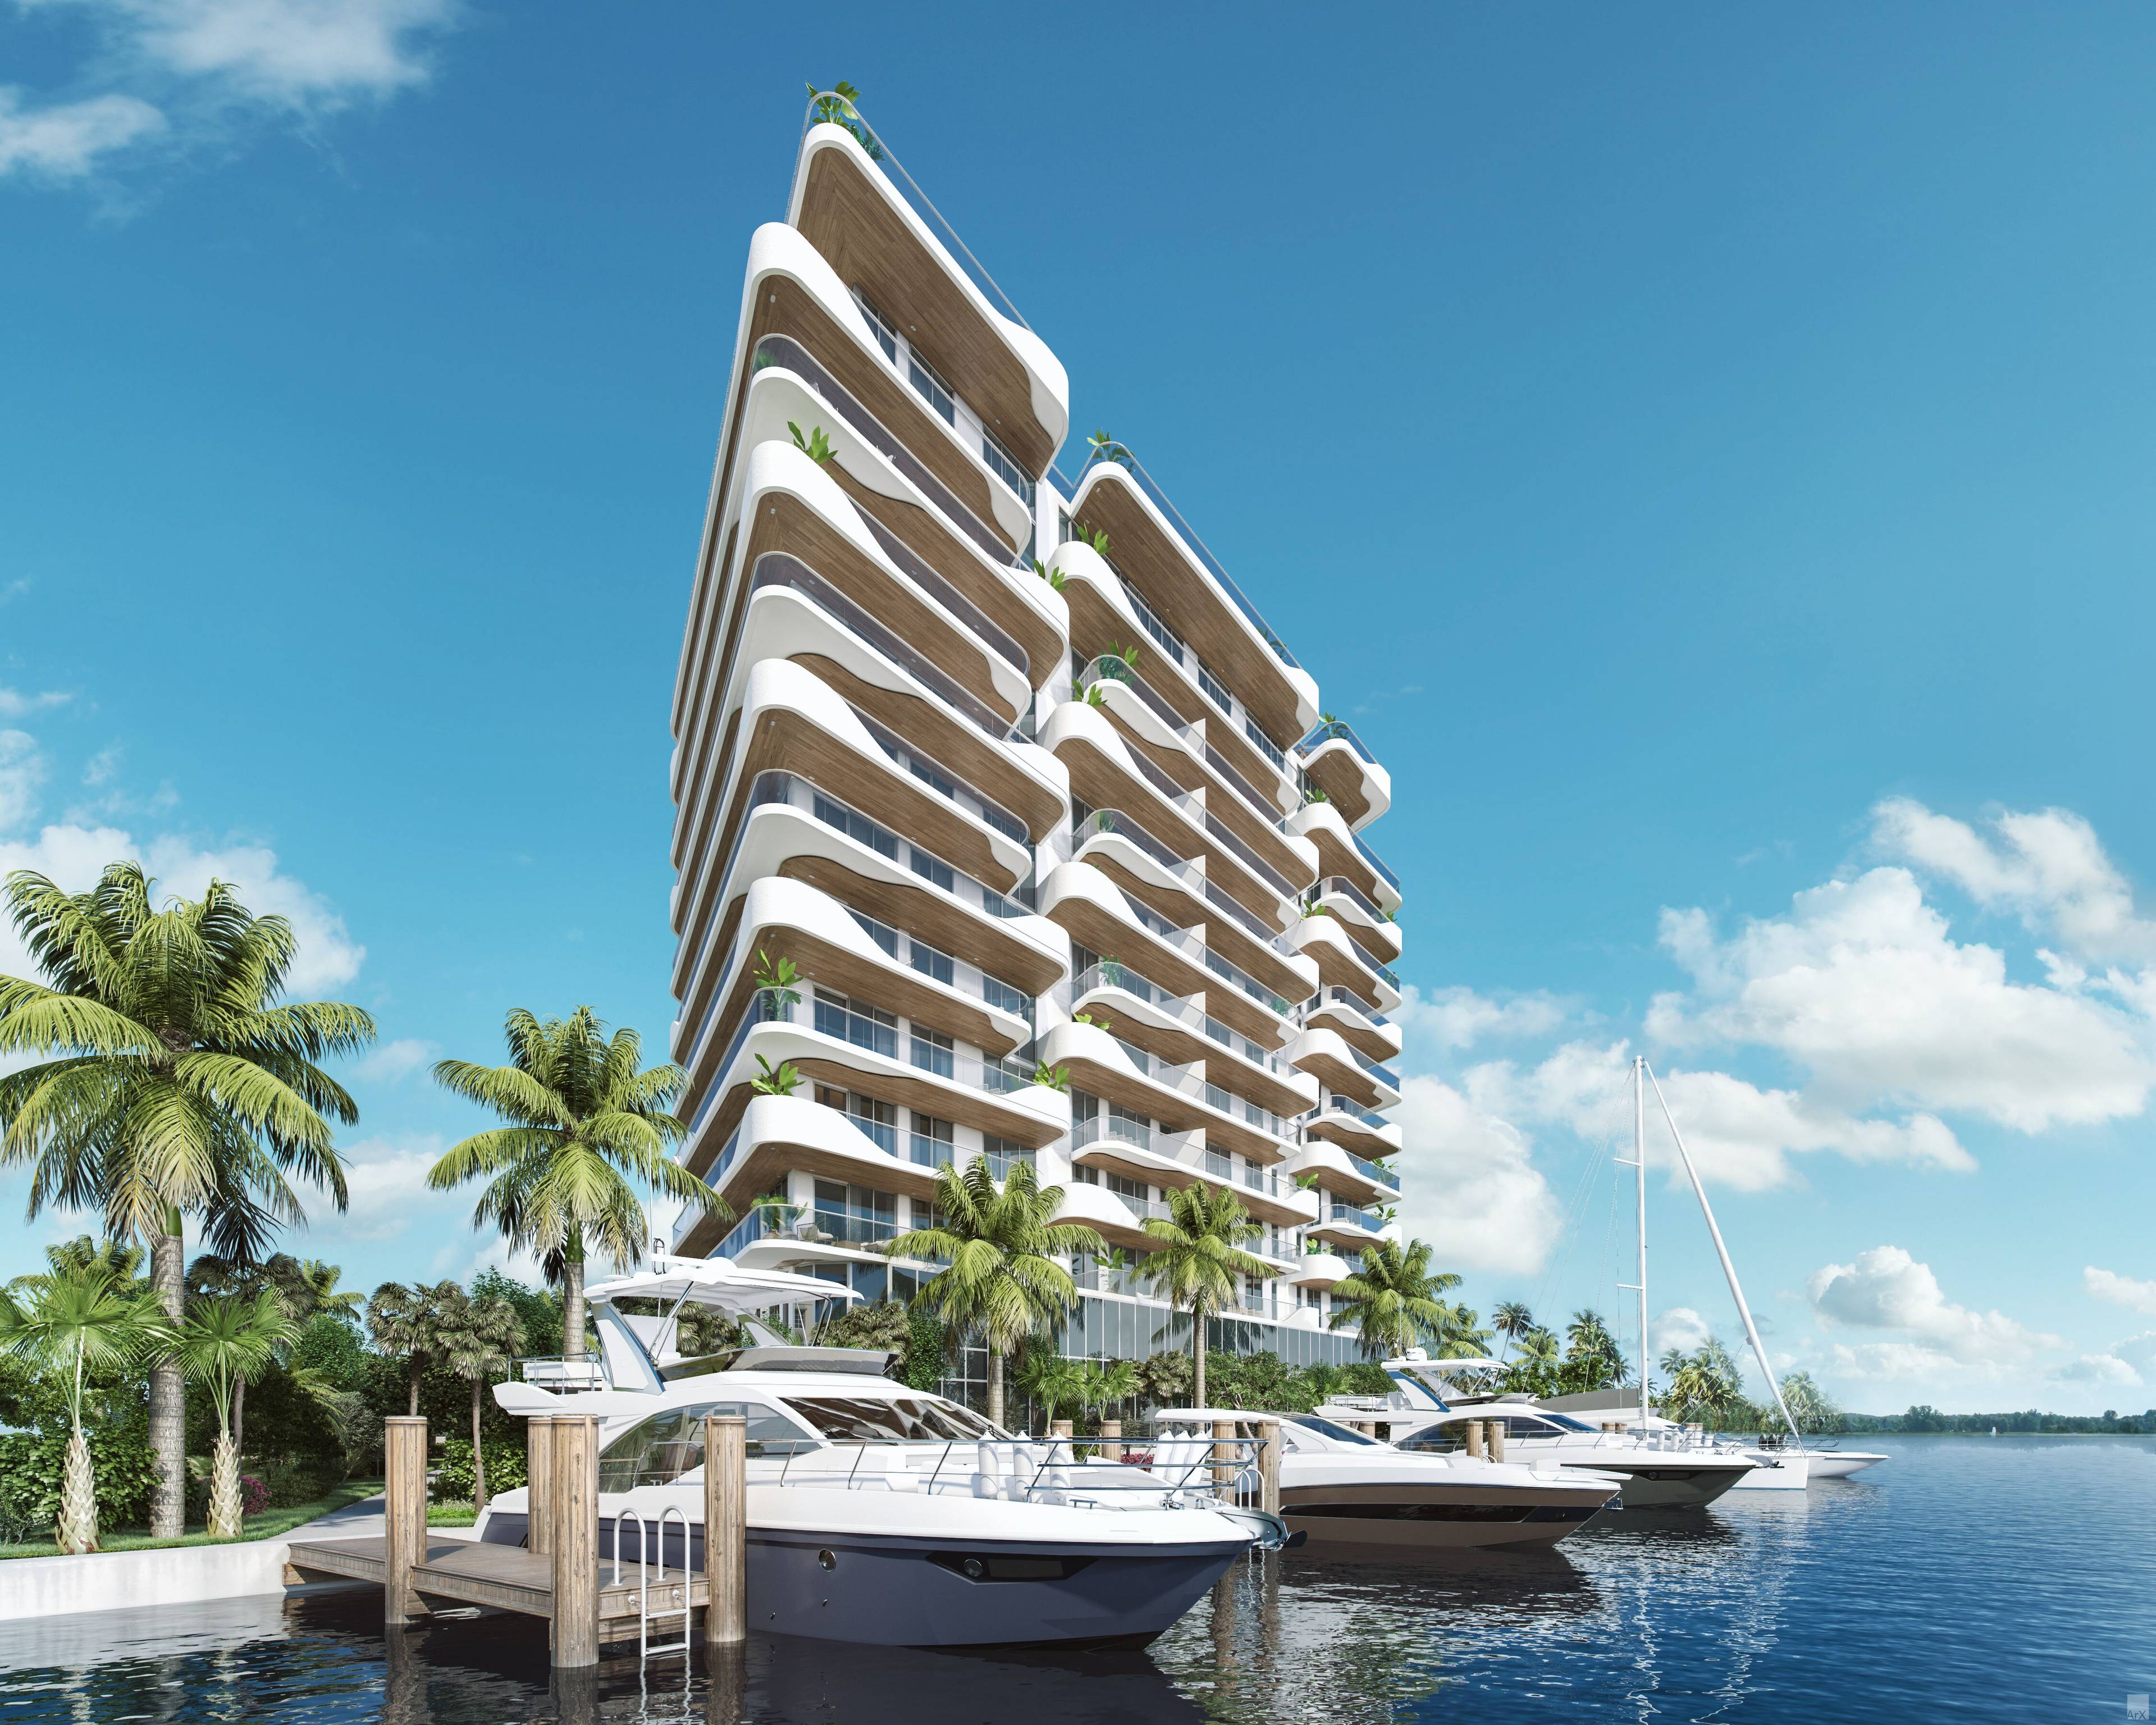 Miami Beach’s newest address for sophisticated waterfront living